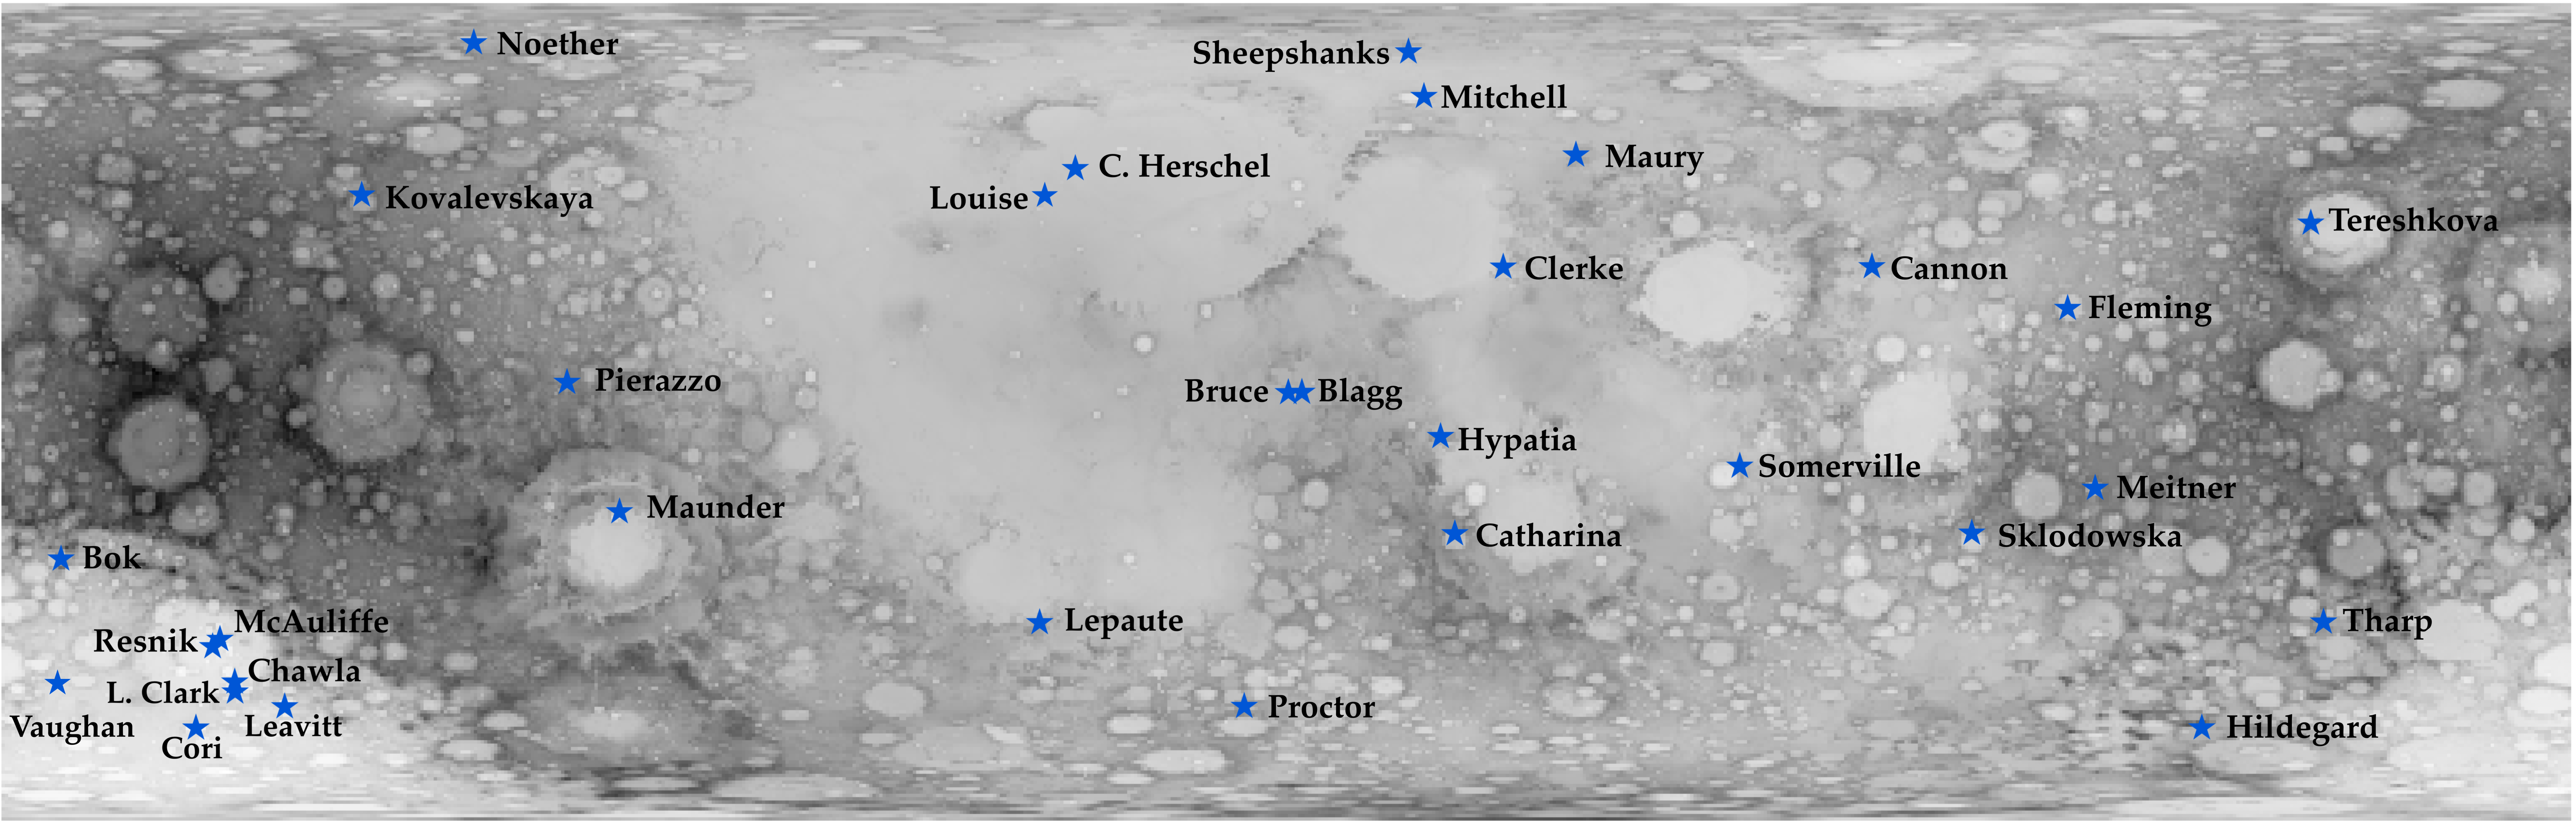 Female craters